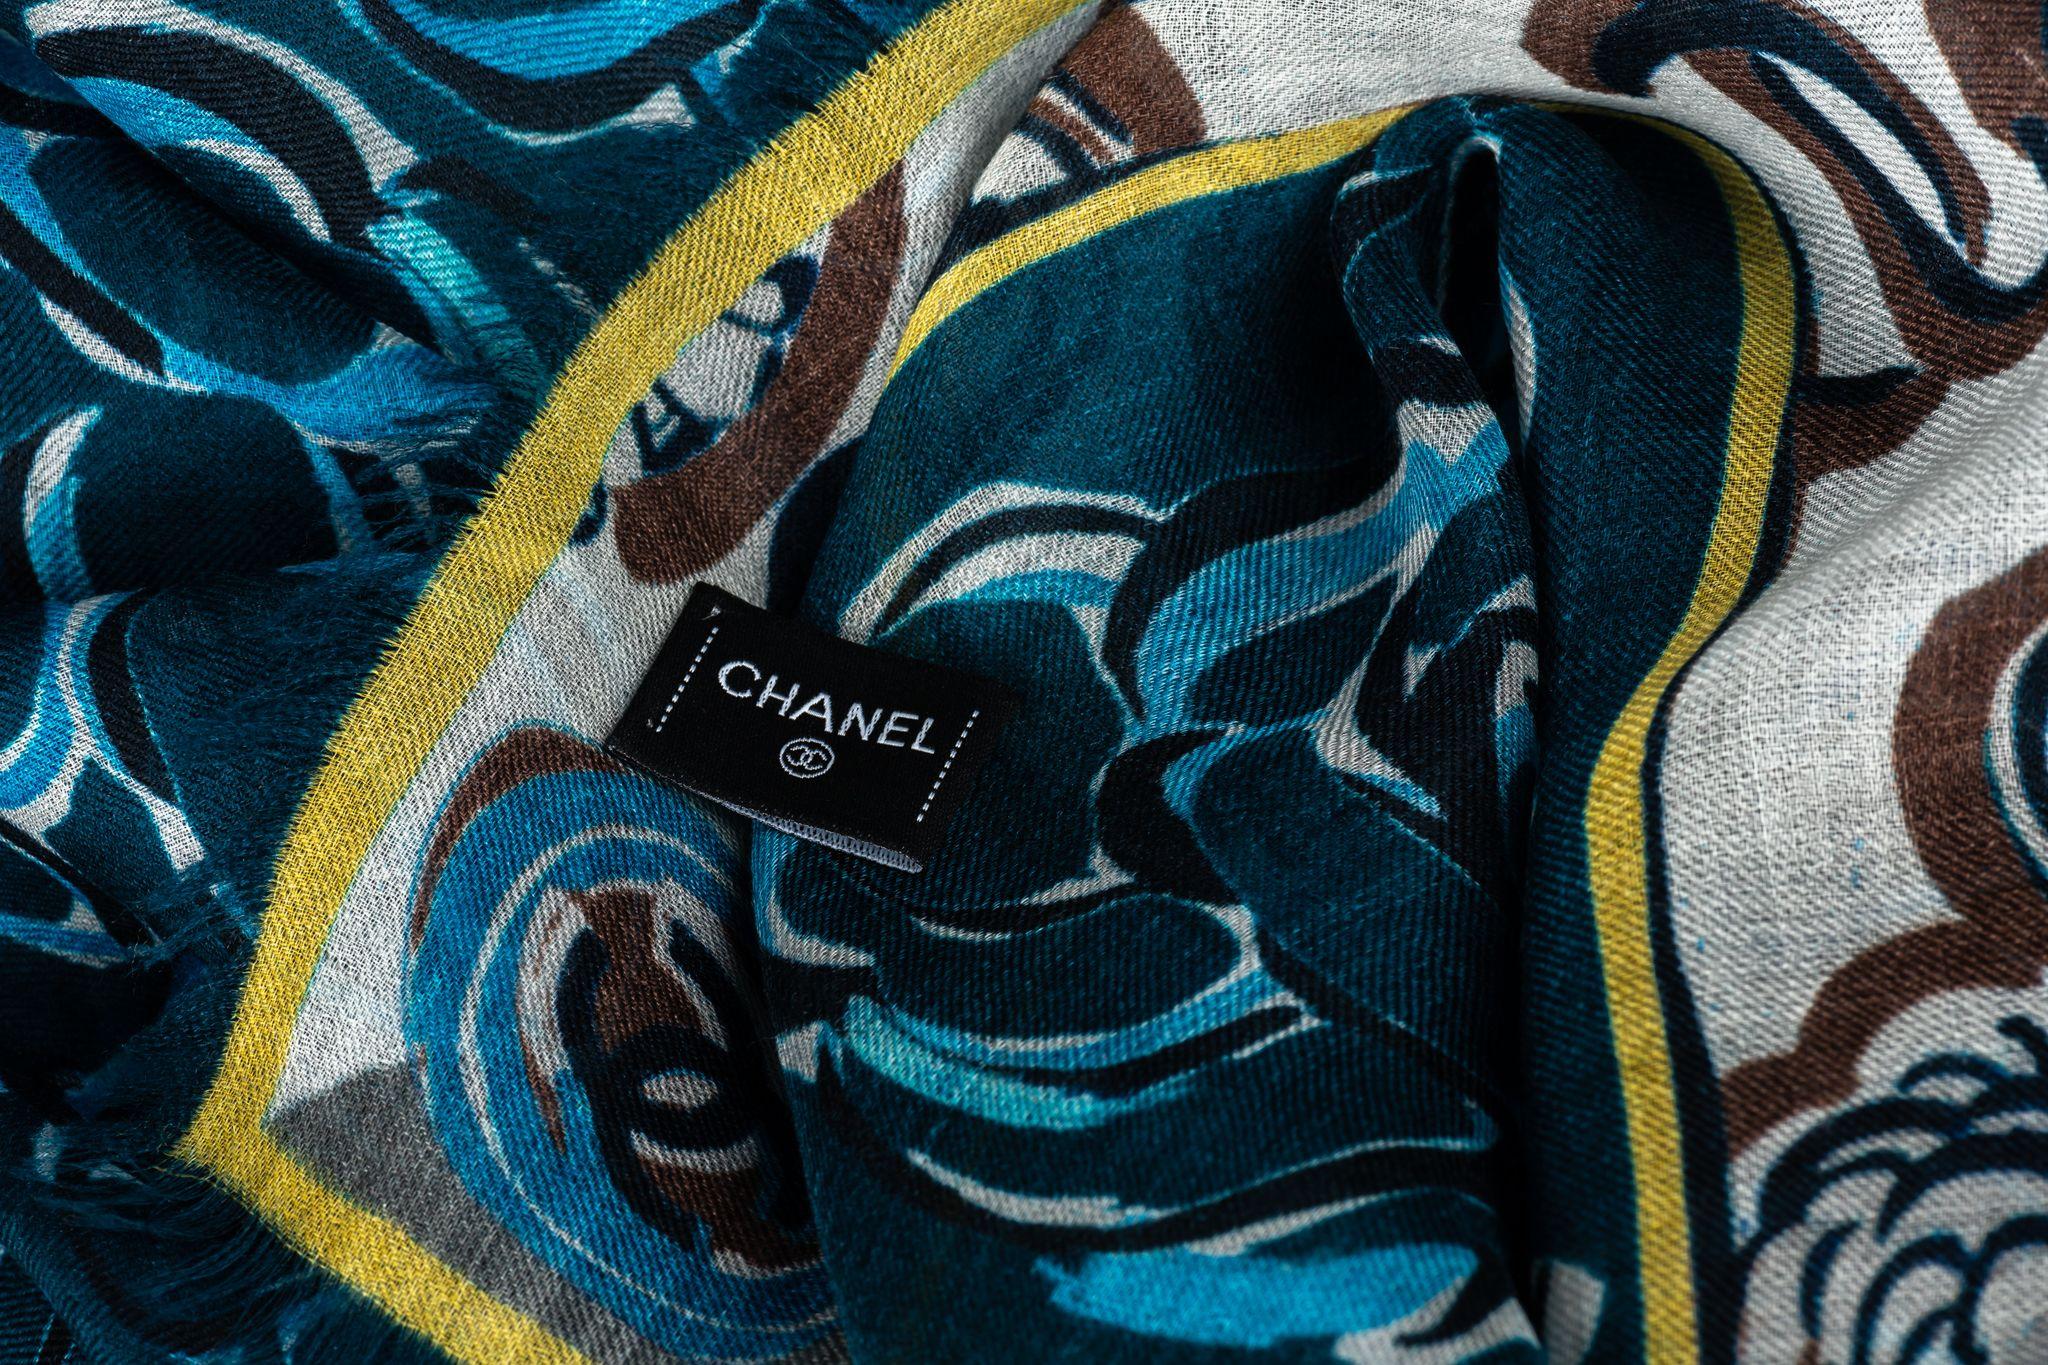 Chanel new camellia cashmere shawl in navy, green, yellow, black . Original care tag.